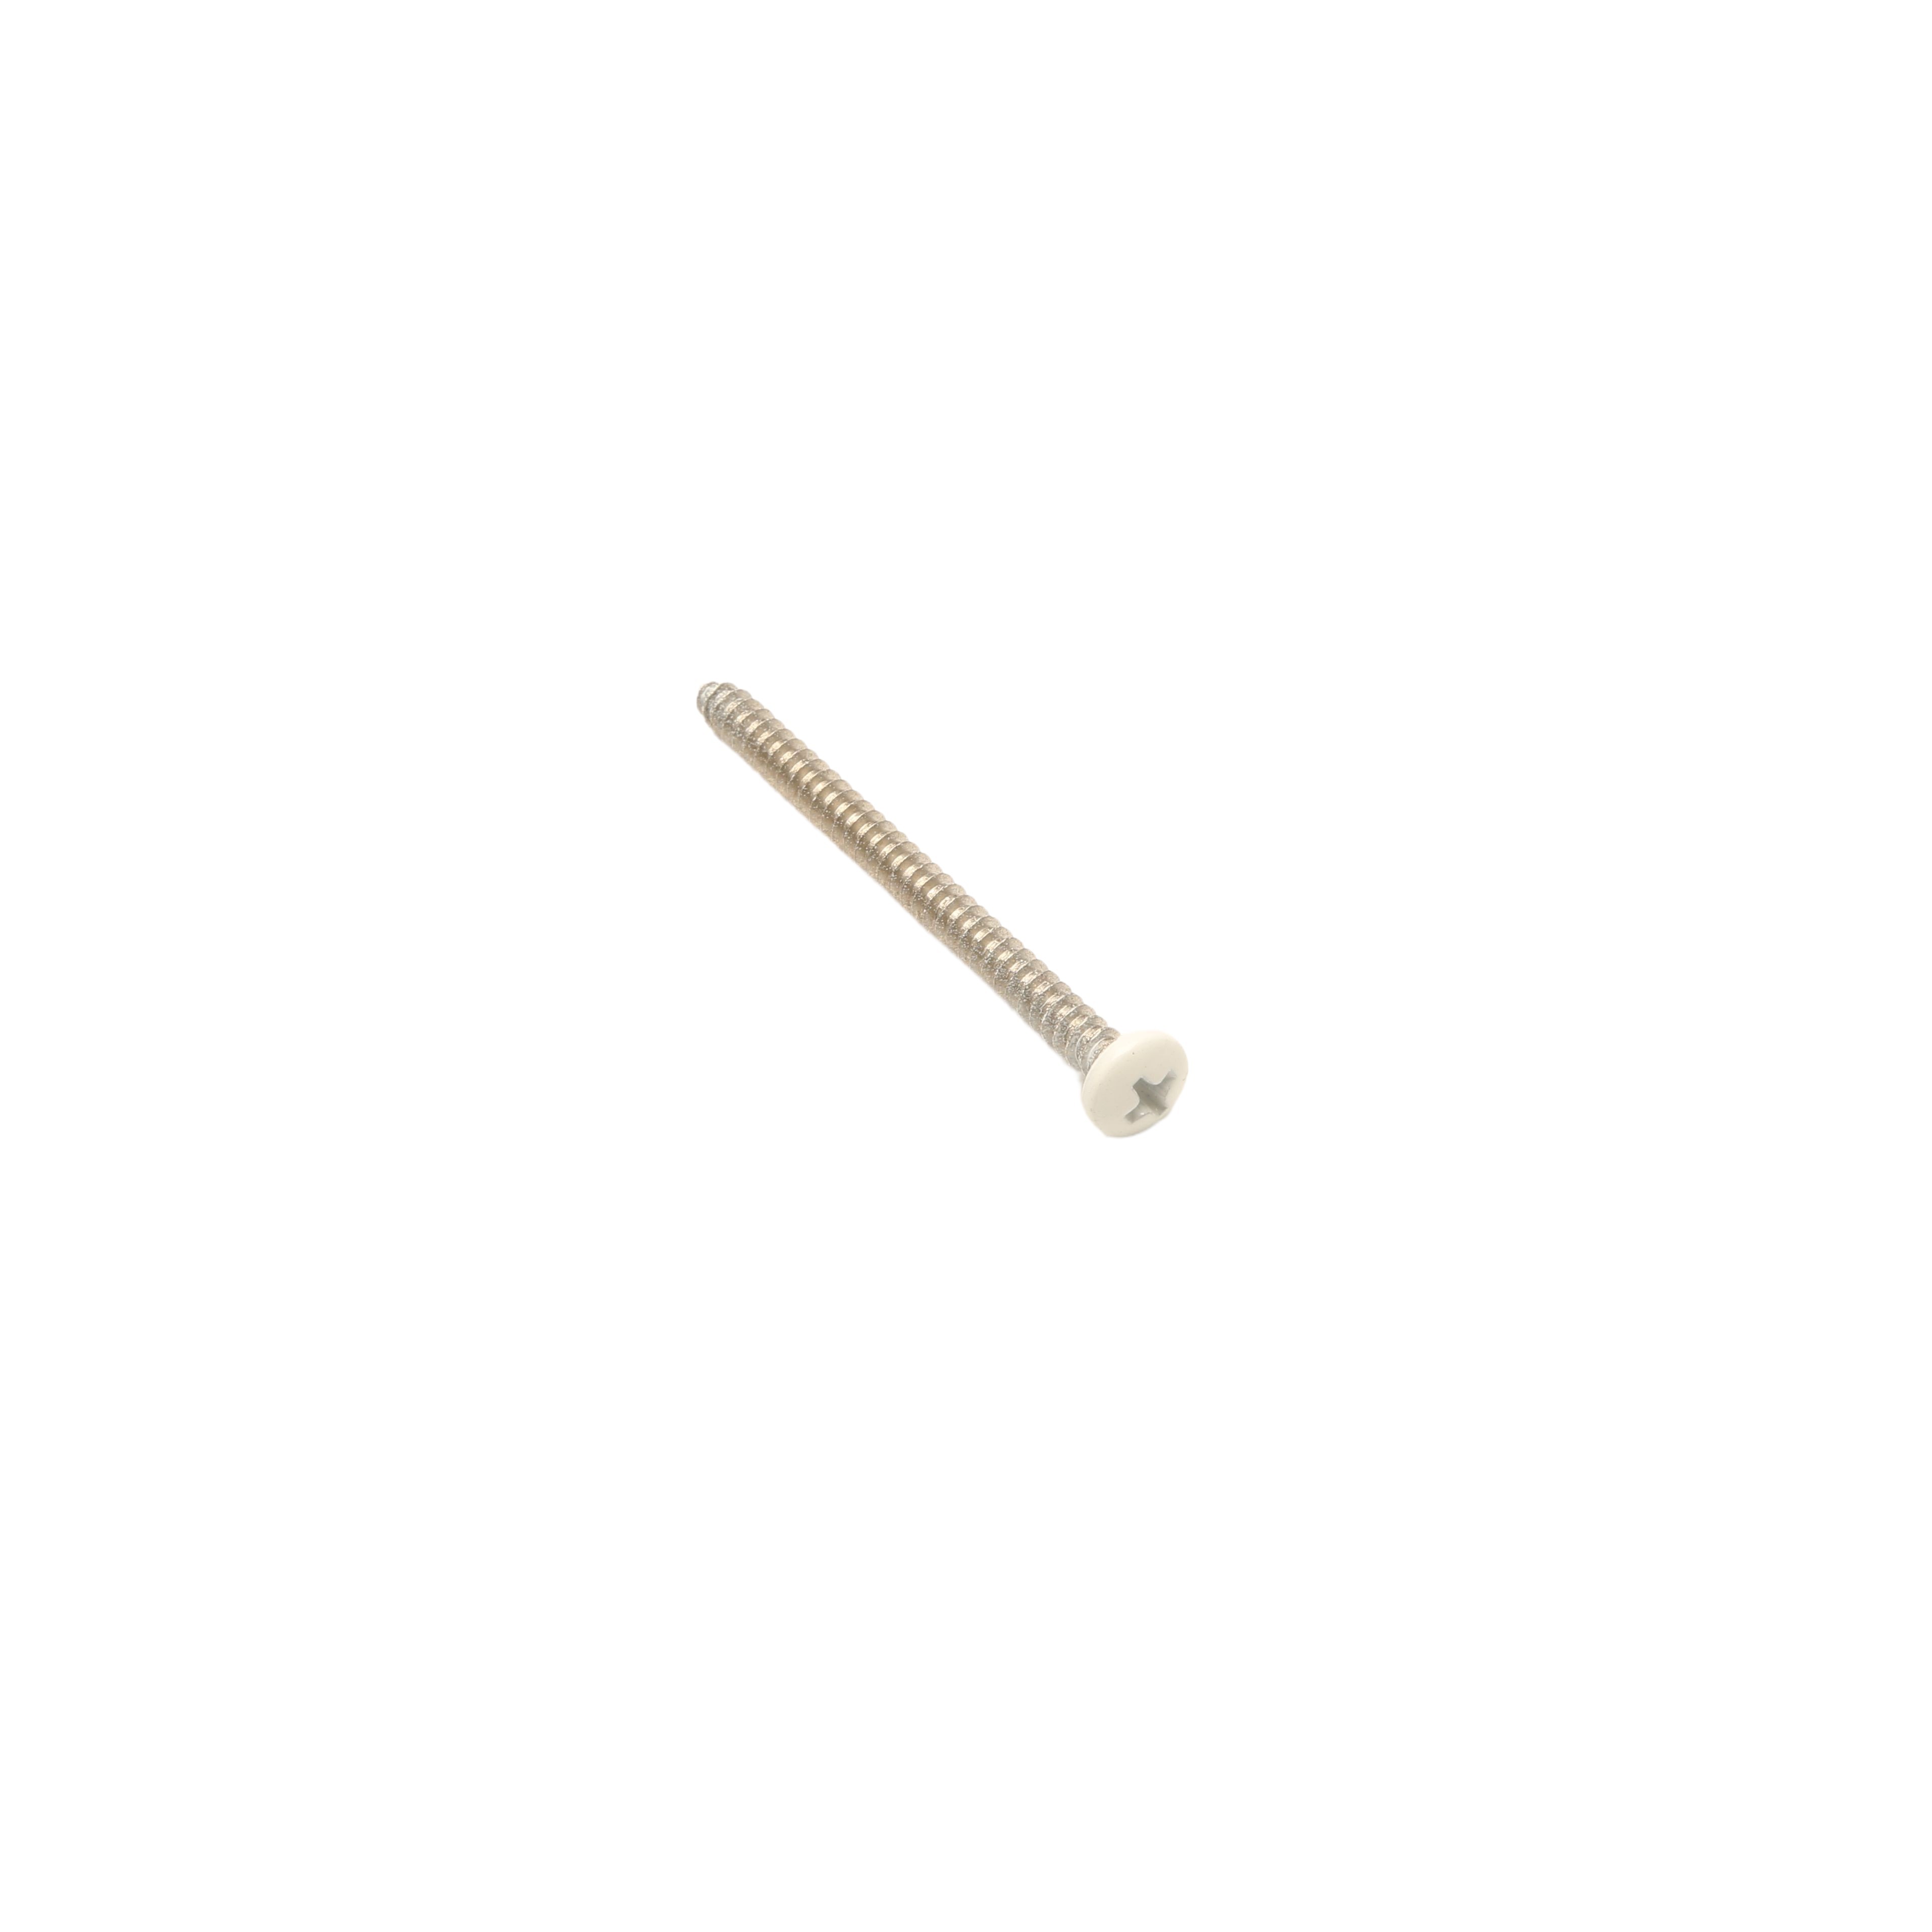 LMT 4026W-WHITE #10 x 2 1/4 Screw - White - Screws For Vinyl Fencing -  Vinyl Fence Fittings and Hardware